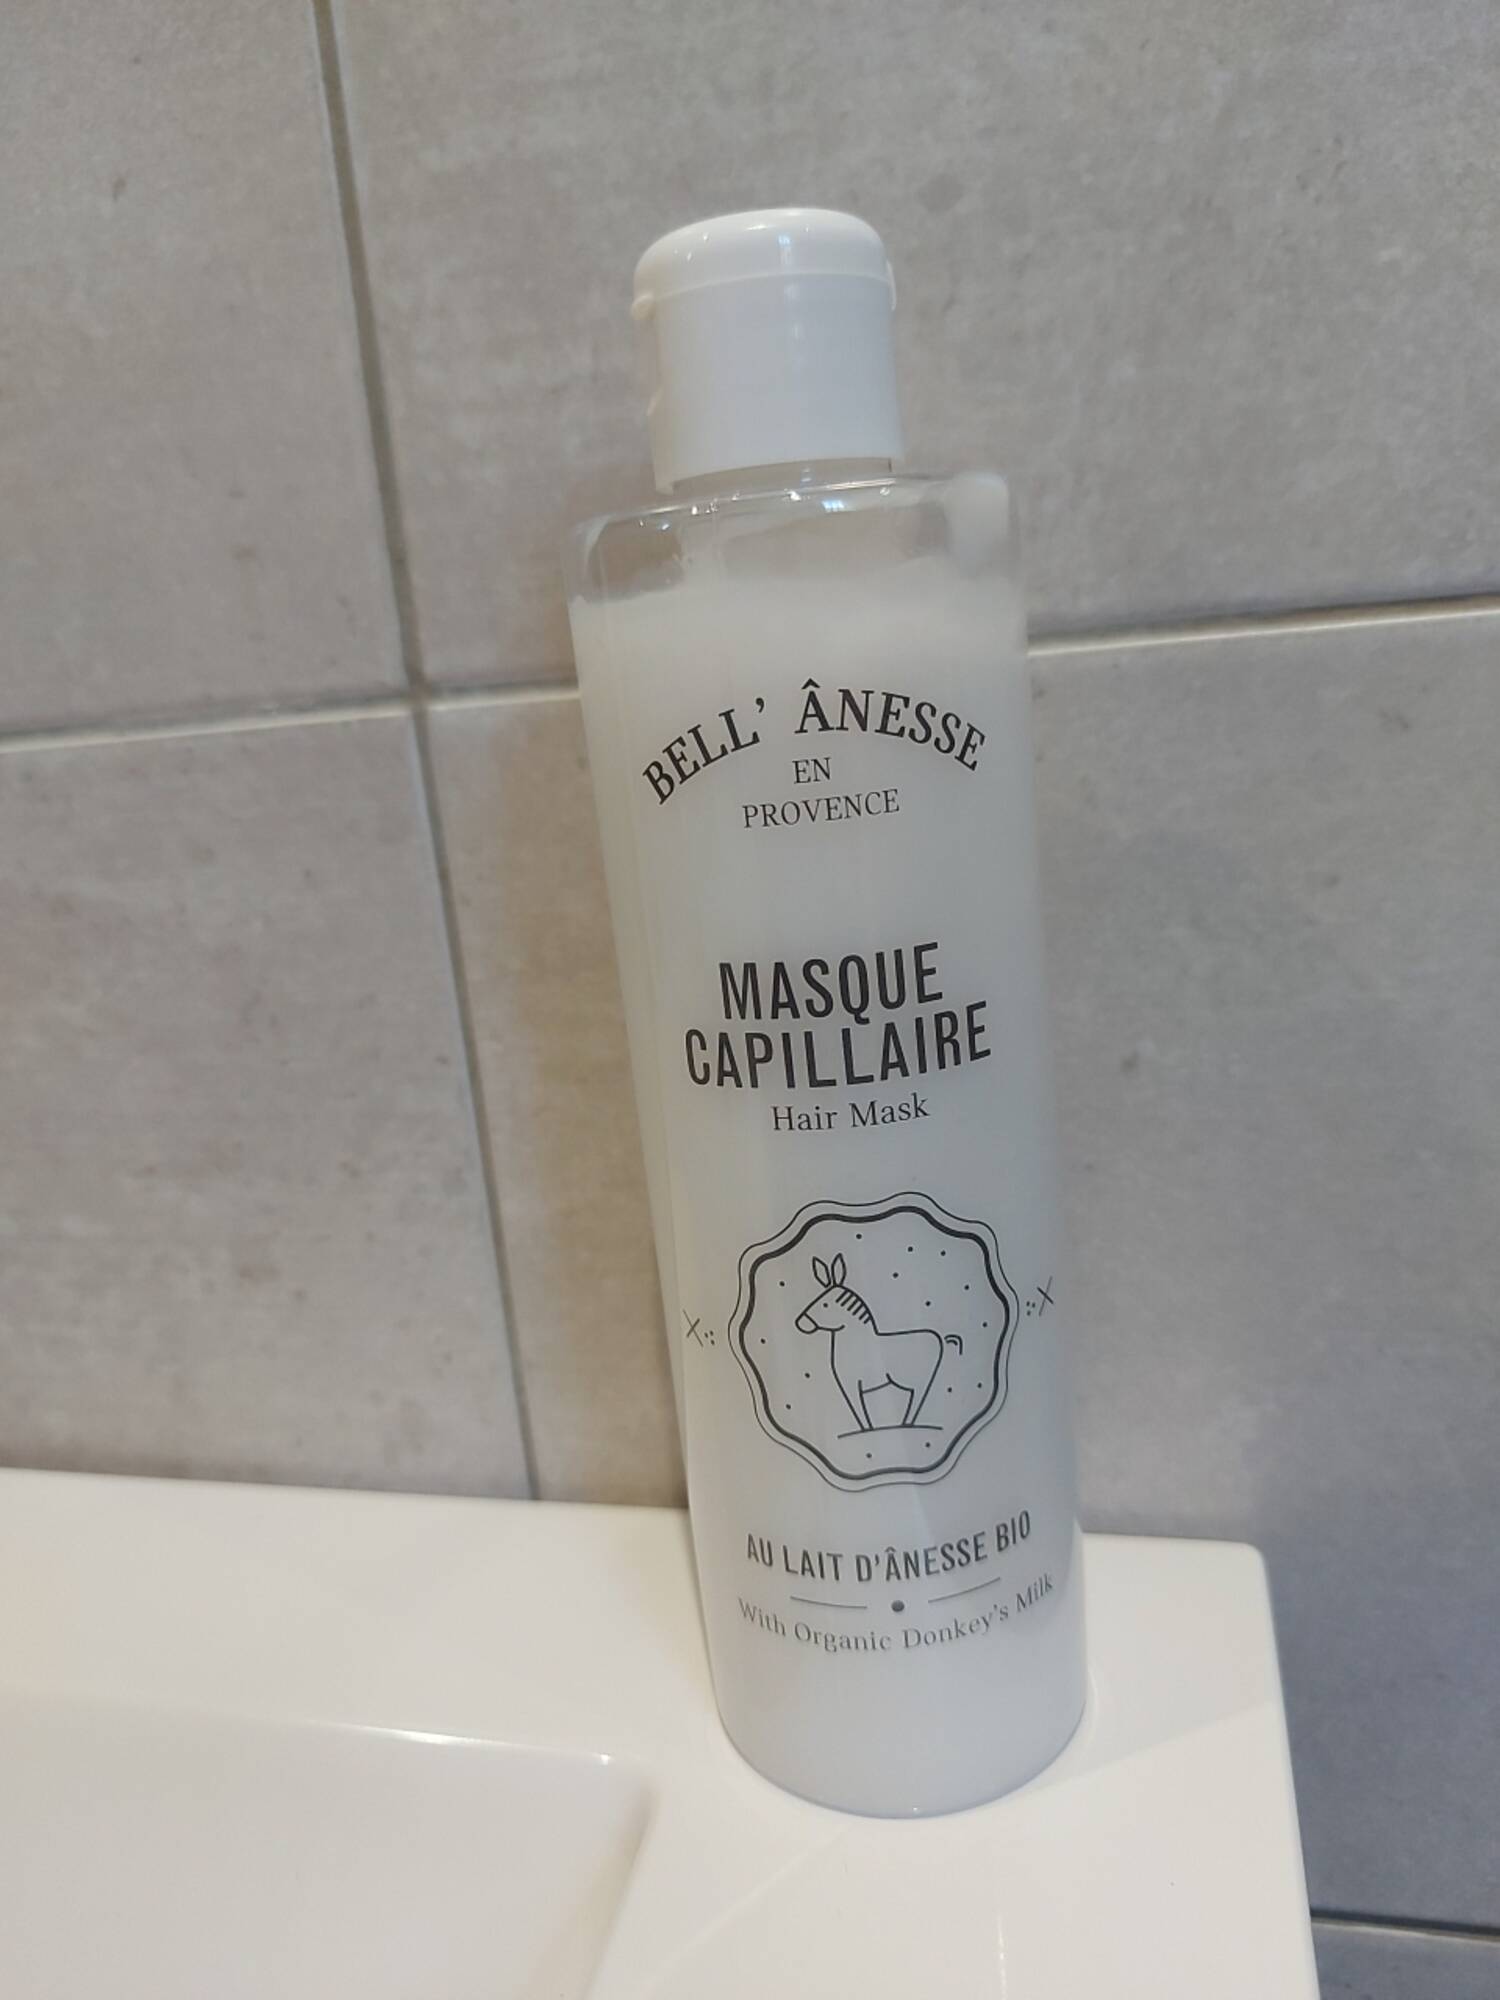 BELL'ÂNESSE EN PROVENCE - Masque capillaire